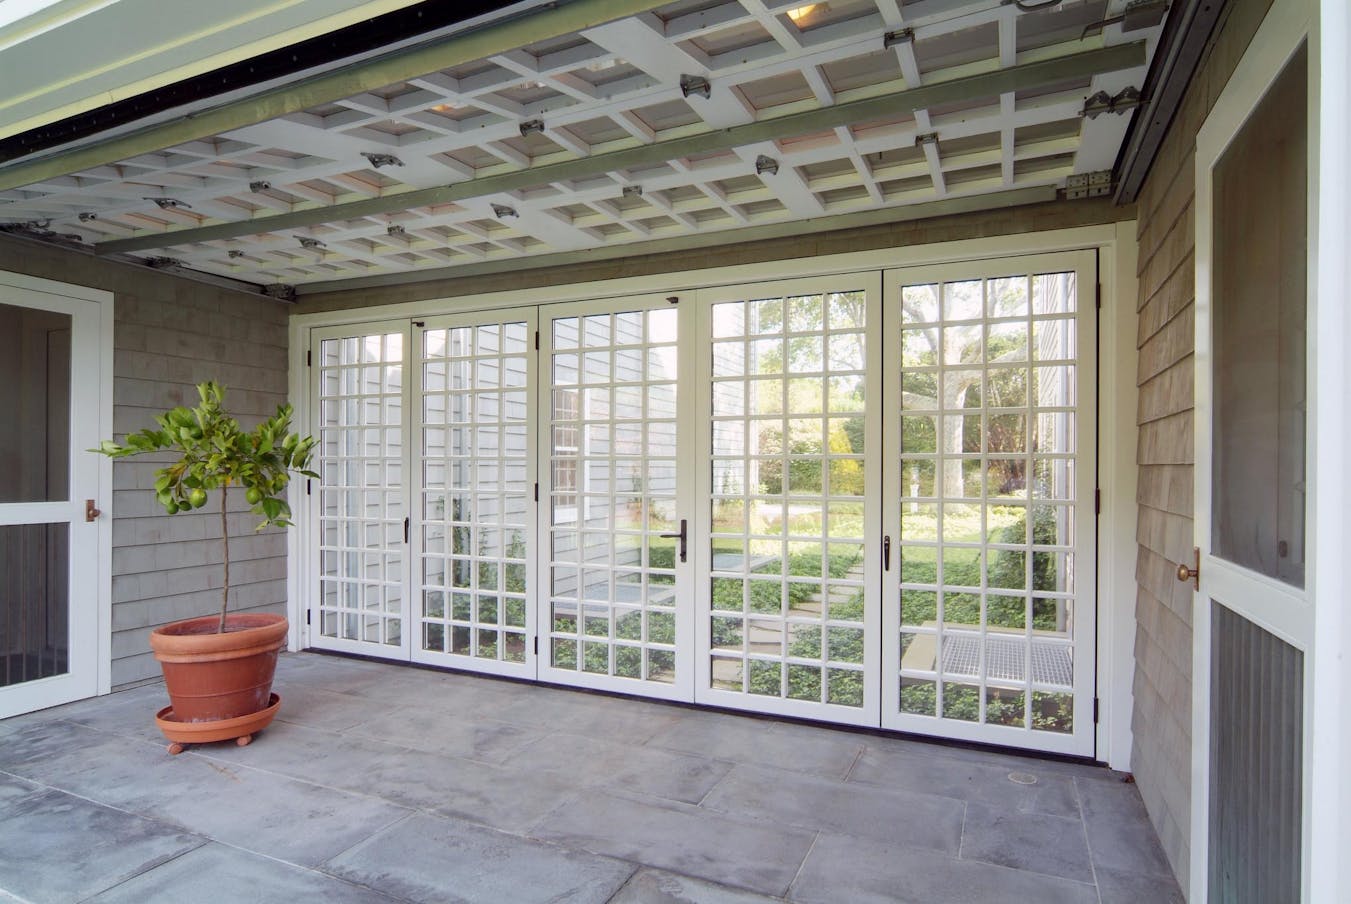 A patio with glass doors and a potted plant